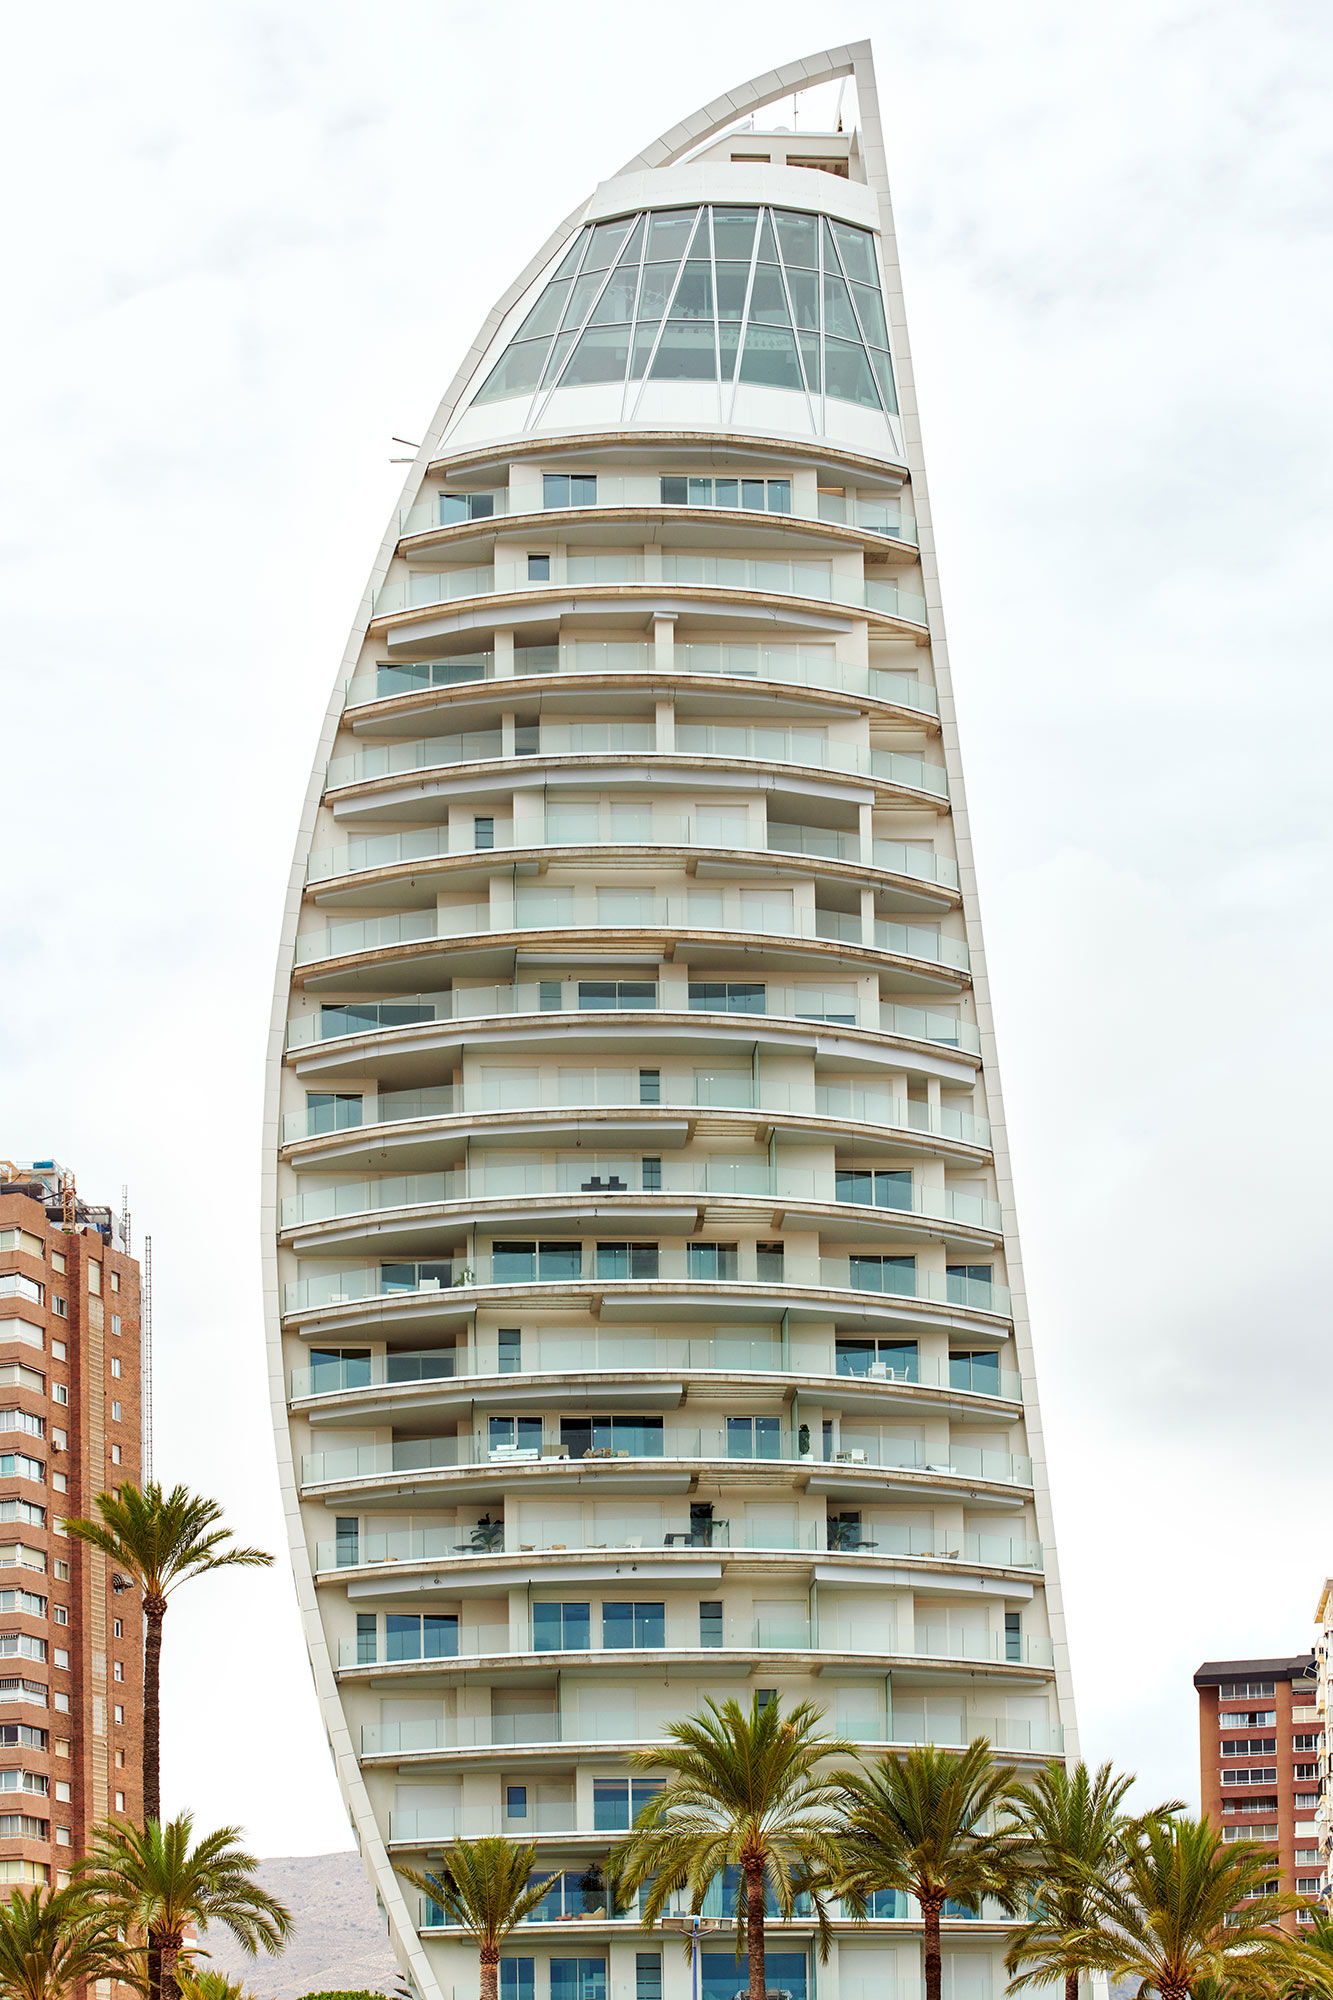 Image of delfin tower benidorm 2 in Dekton presents the world’s first curved and ventilated façade made of ultra-compact stone - Cosentino